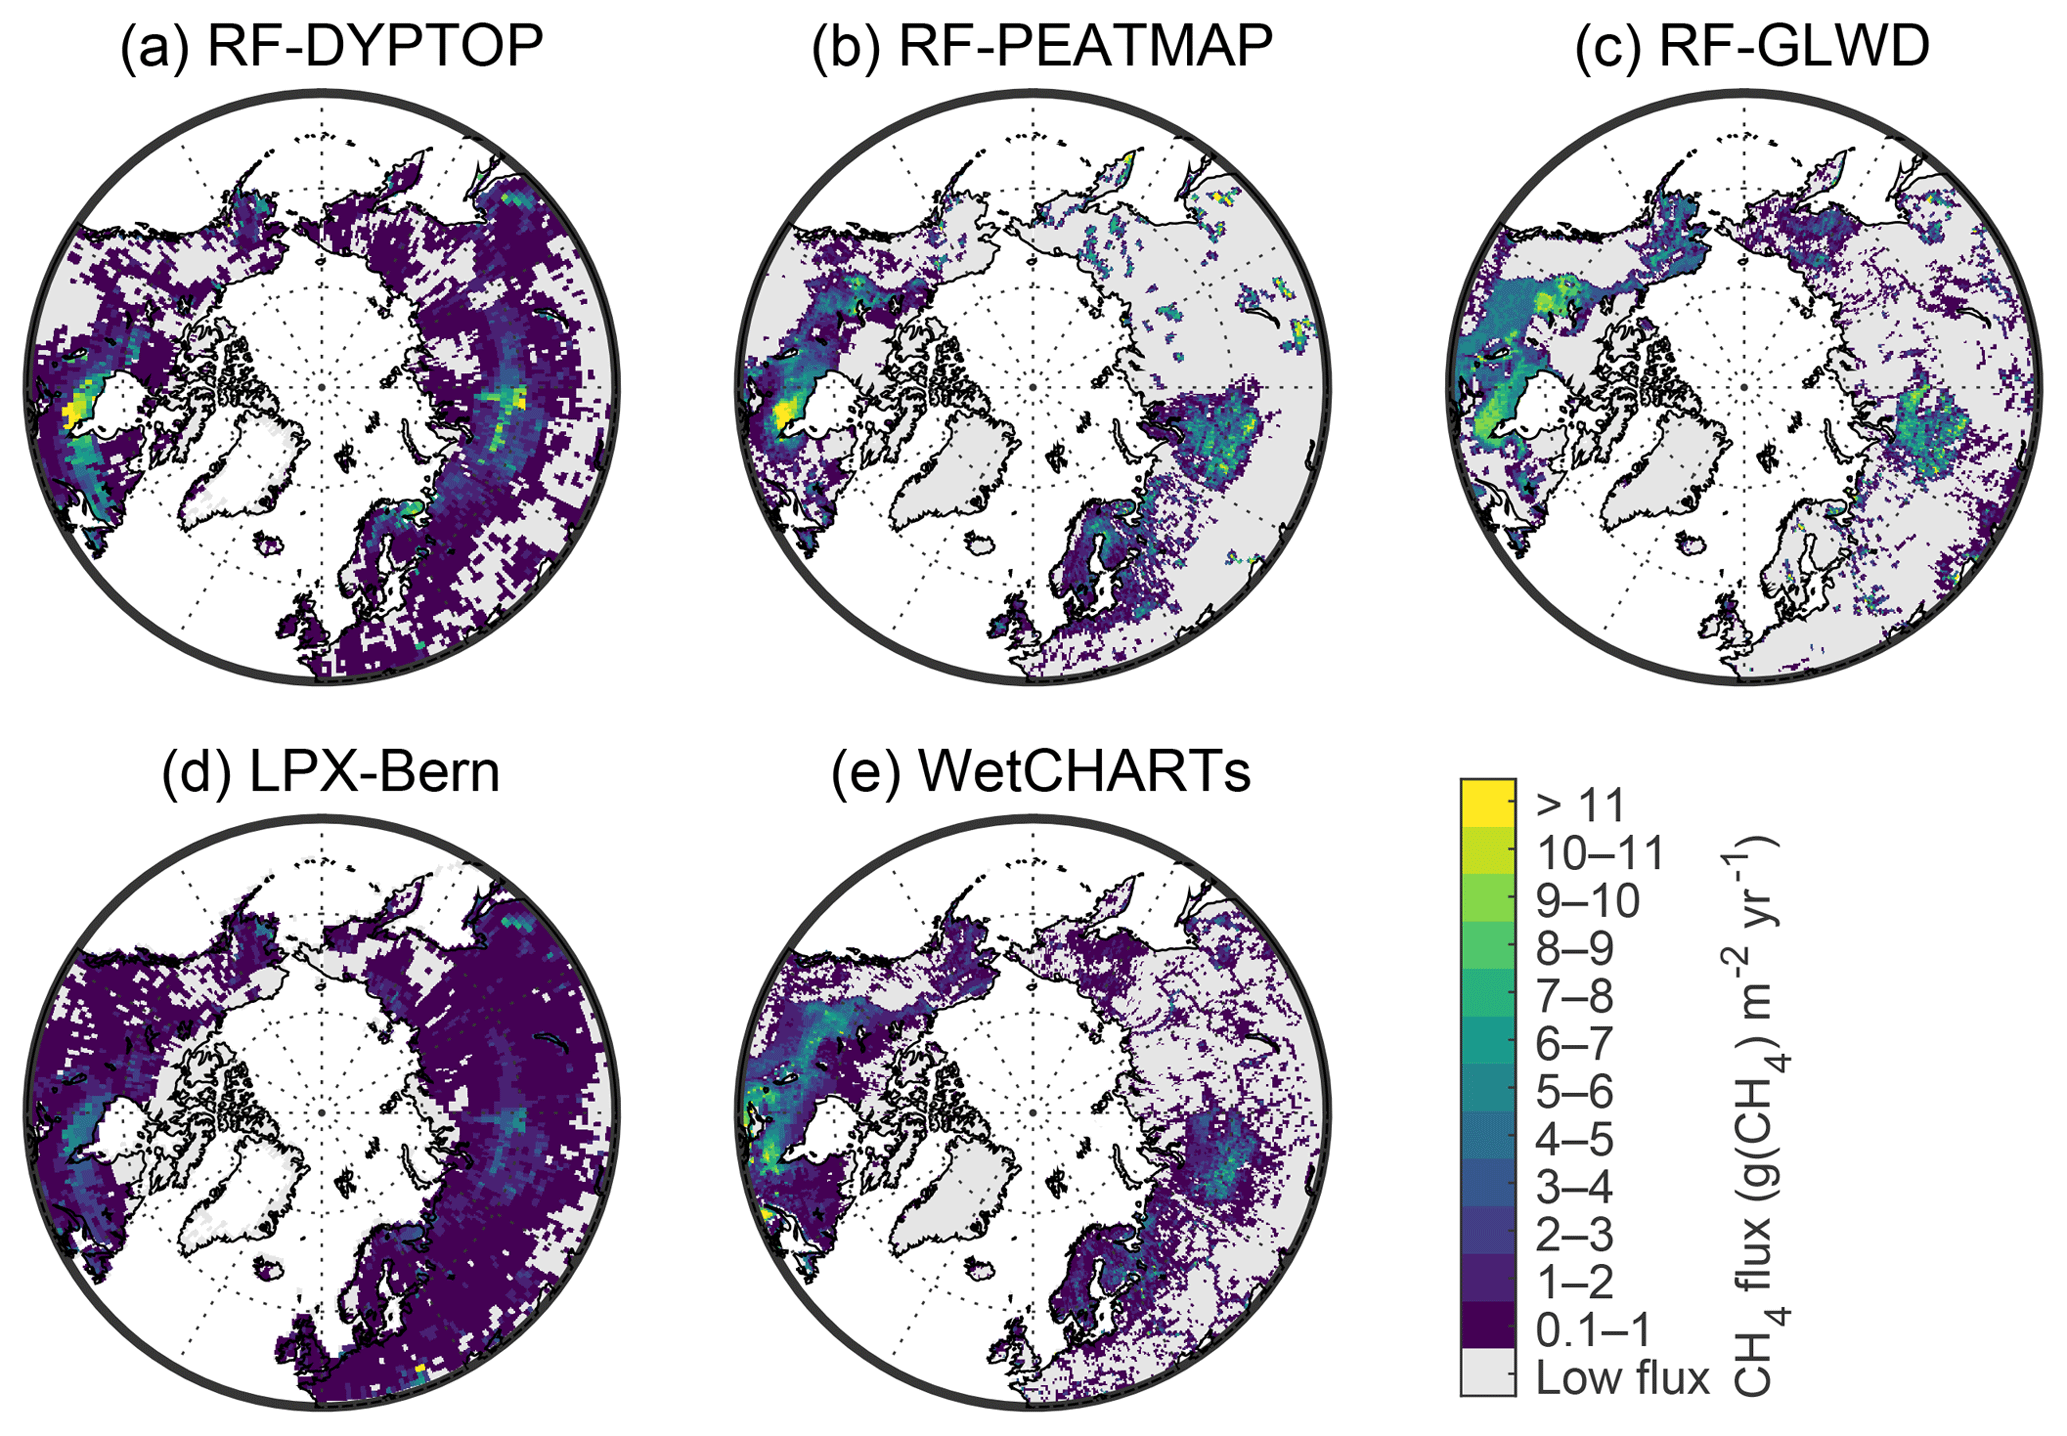 ESSD - Monthly gridded data product of northern wetland methane